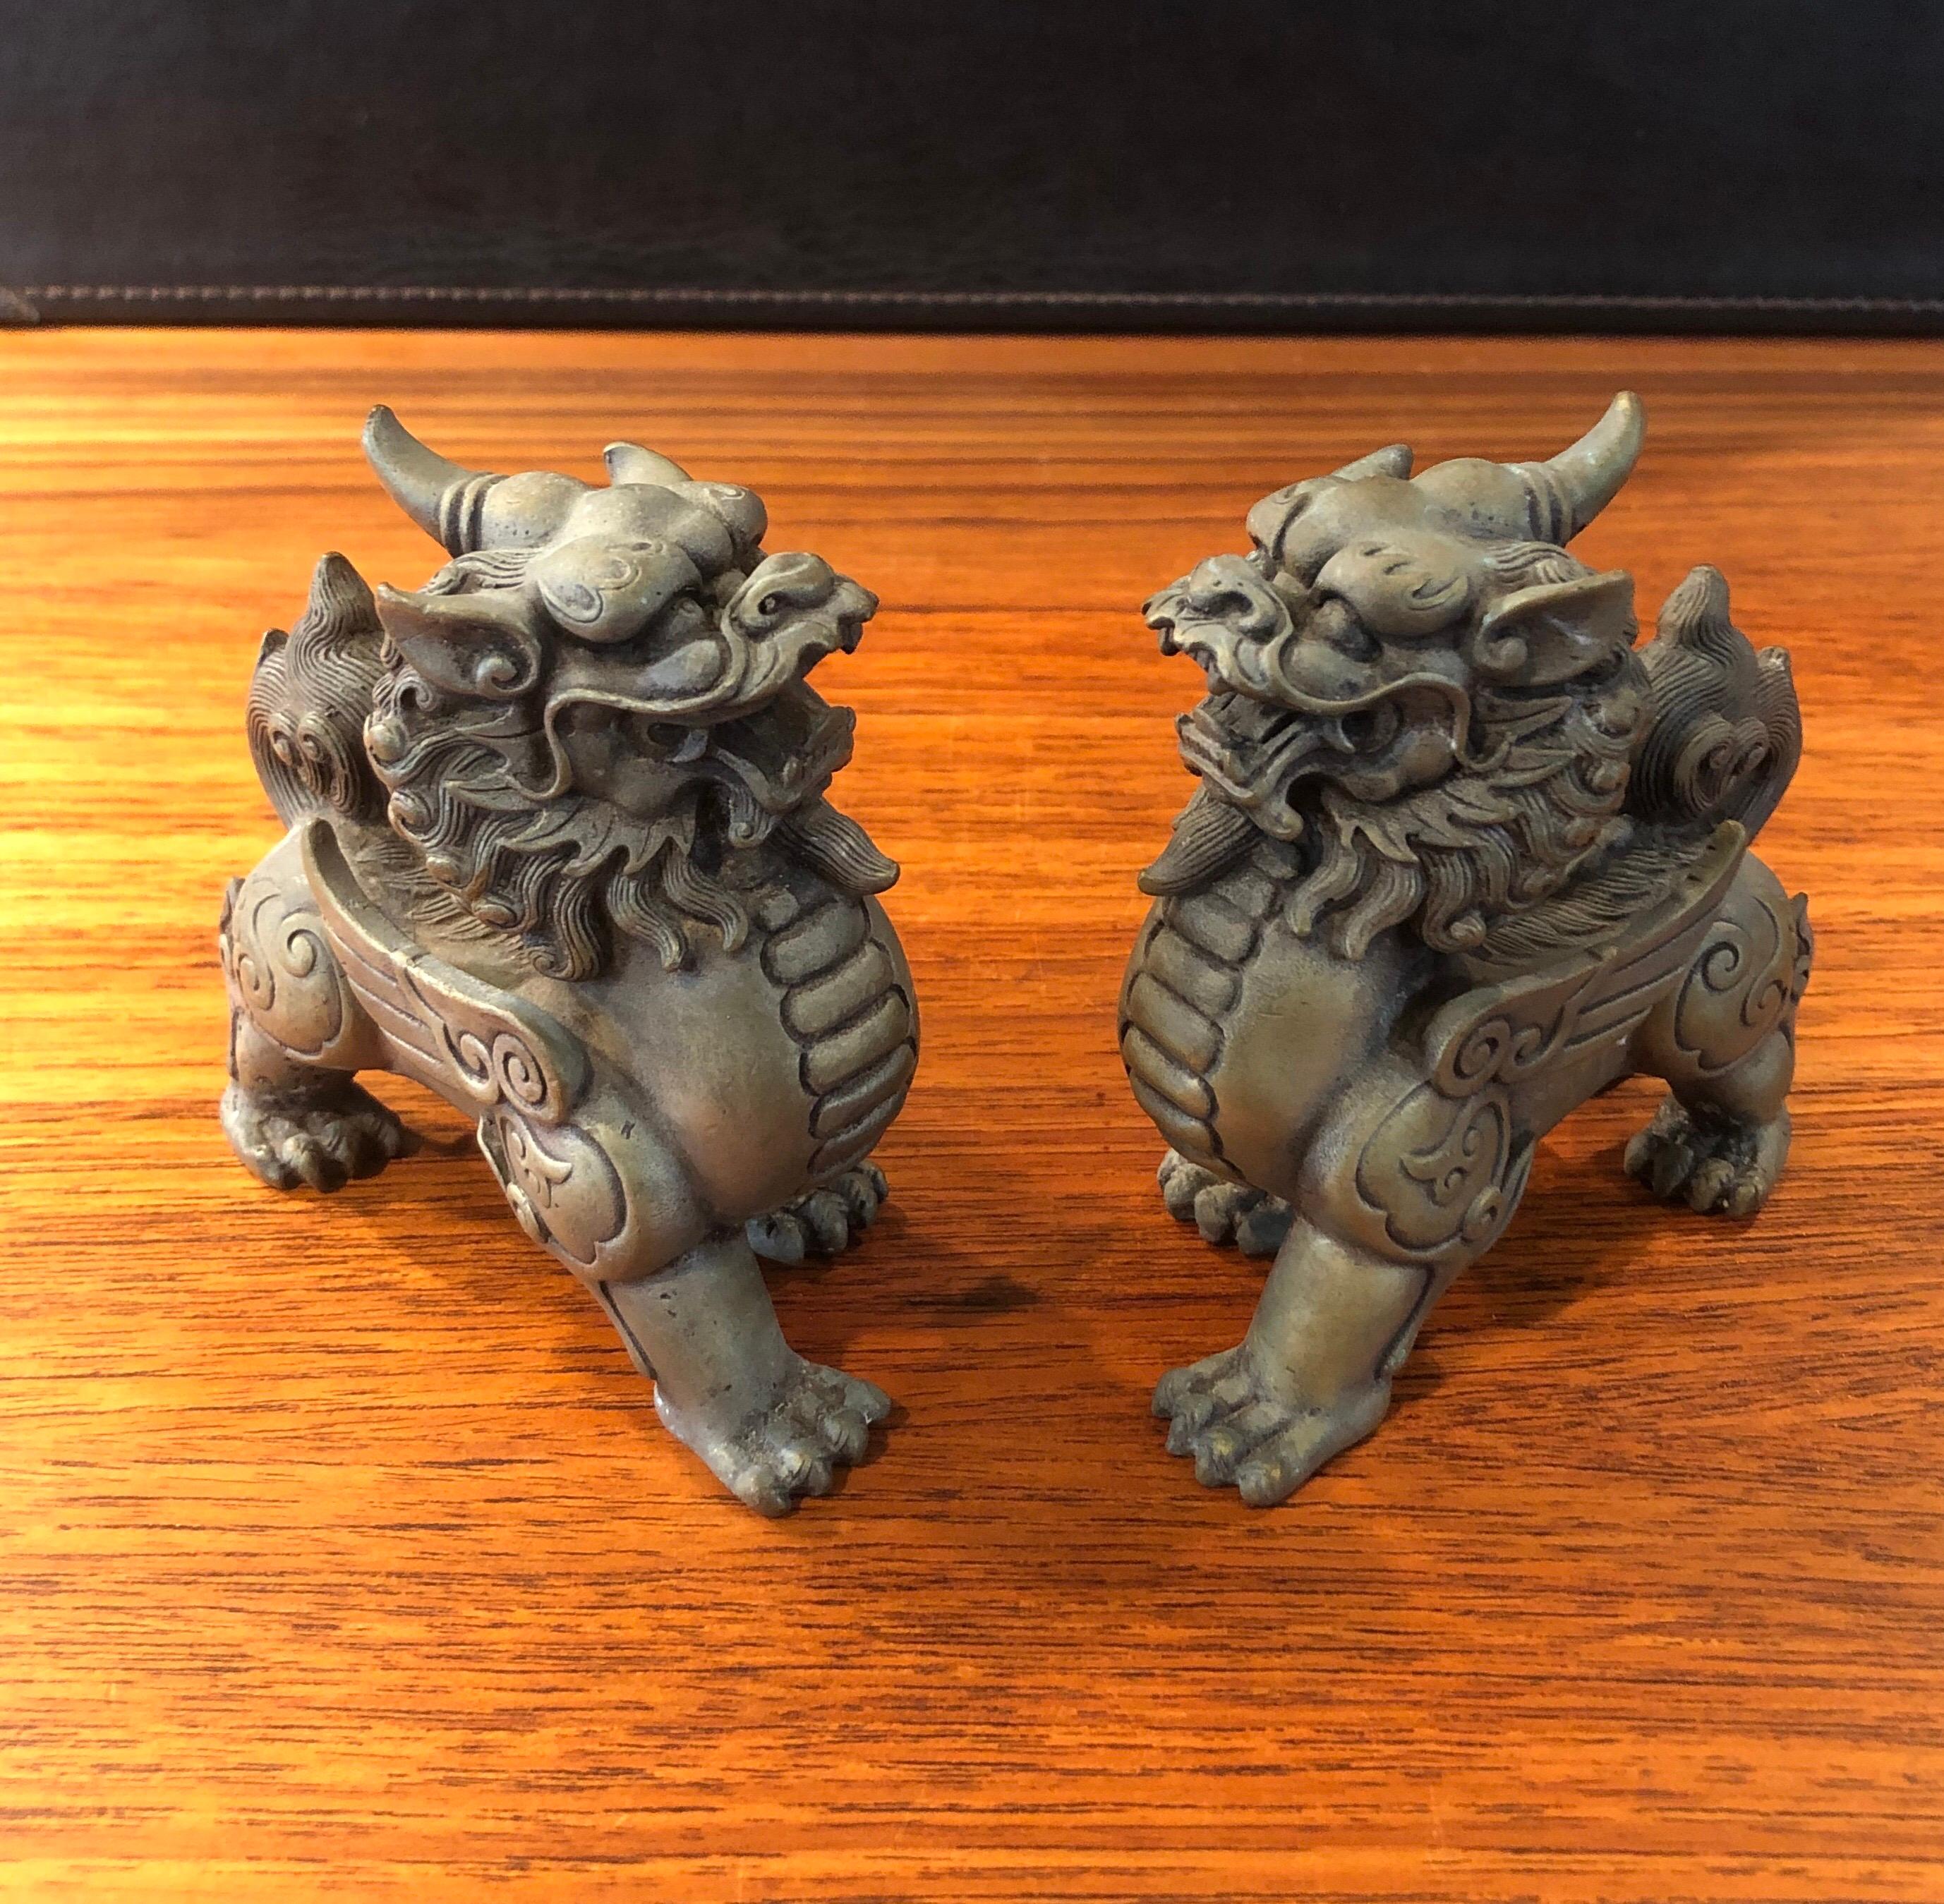 Pair of patinated bronze Chinese foo dogs, circa 1930s. Excellent vintage condition with amazing detail and a gorgeous patina. Each dog measures 6.5